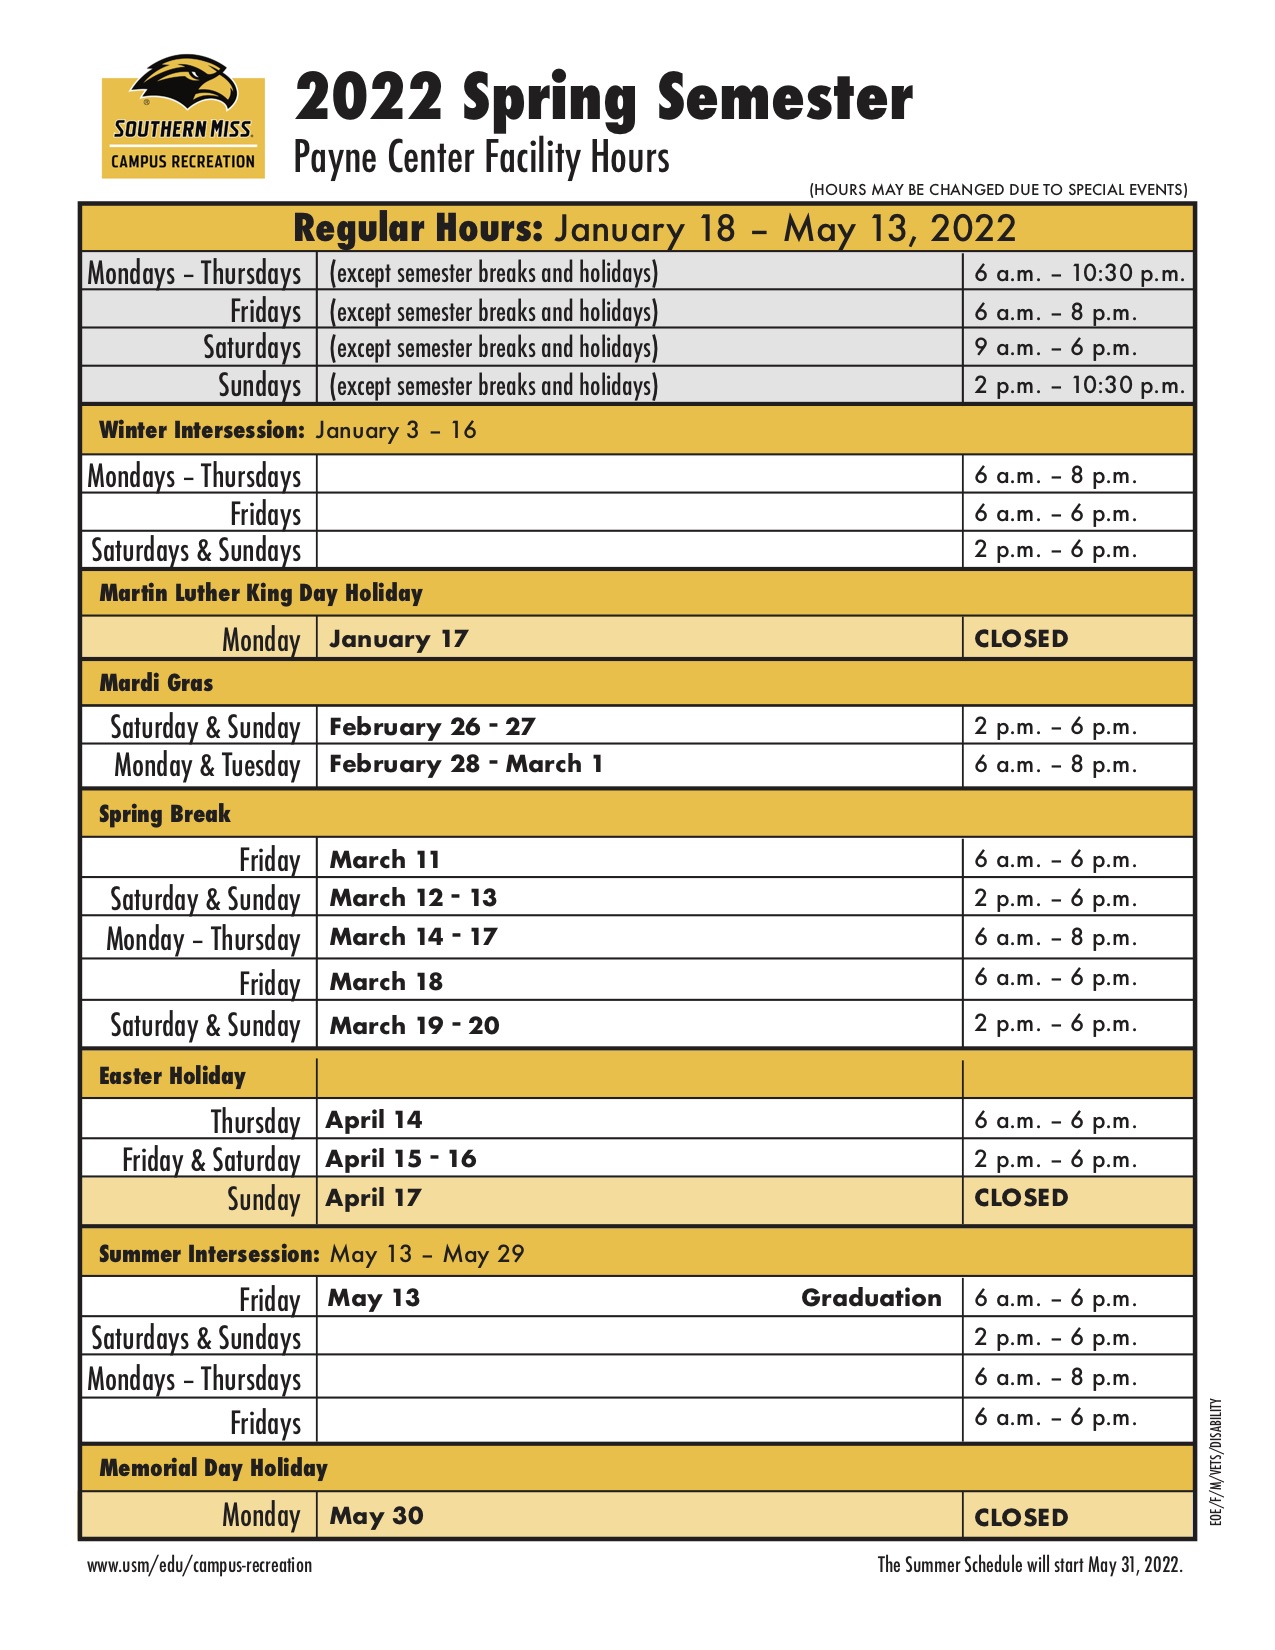 Mis 2022 Schedule Schedules | Campus Recreation | The University Of Southern Mississippi